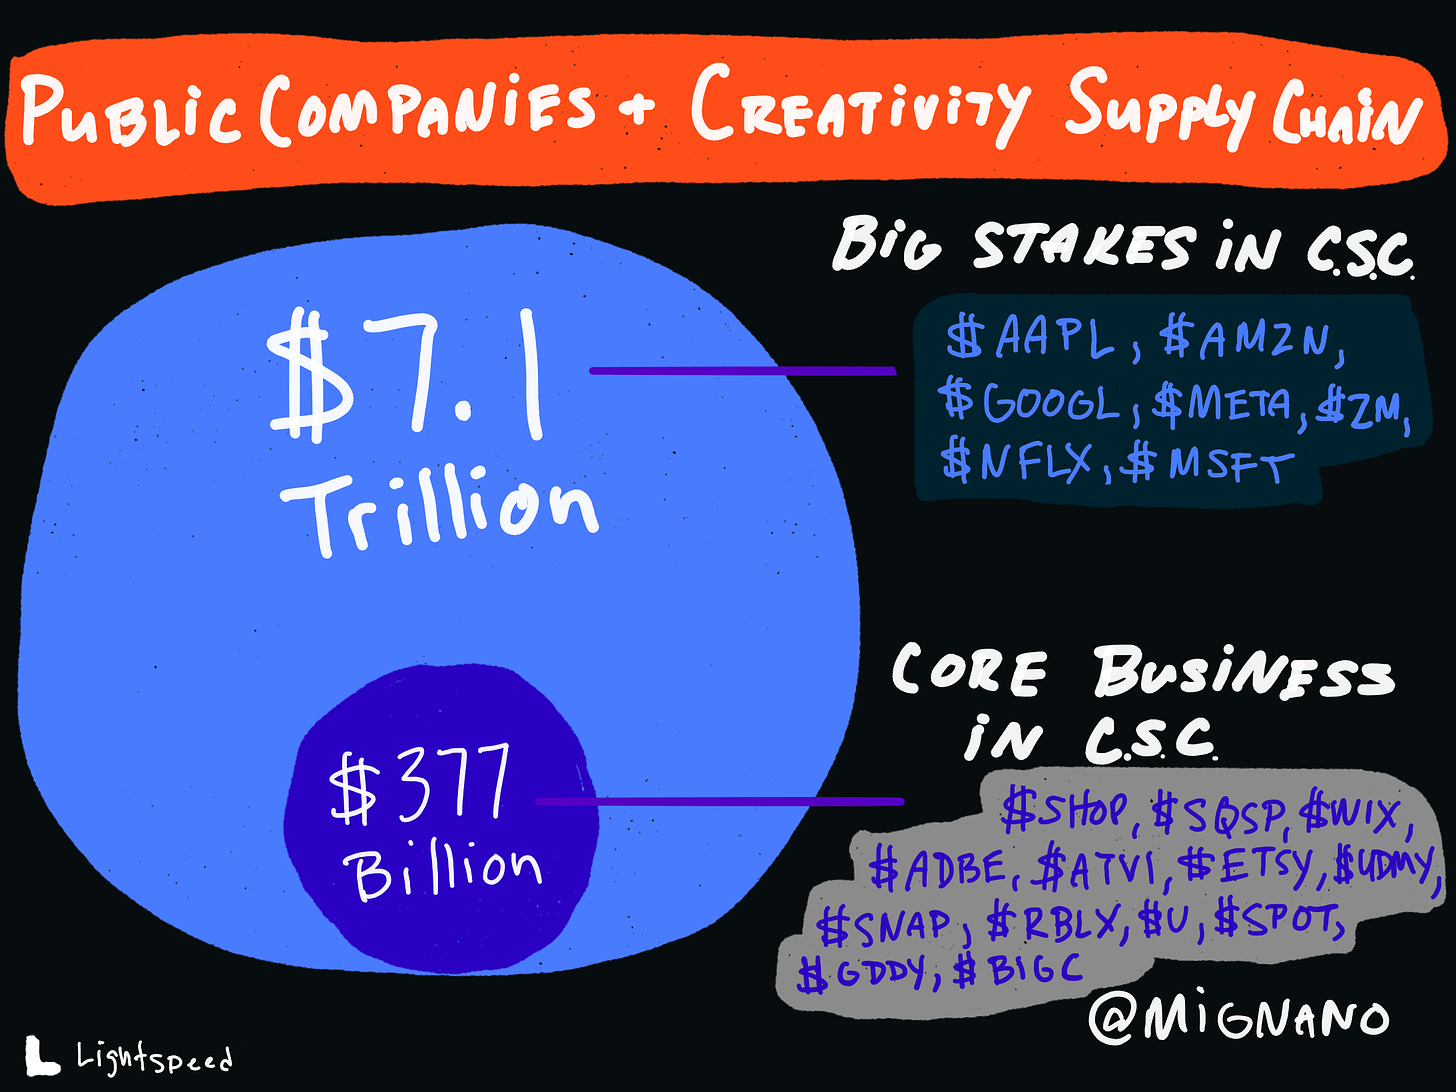 A hand drawn illustration showing that publicly traded companies are investing heavily in the Creativity Supply Chain. From the essay, The Creativity Supply Chain by Michael Mignano.